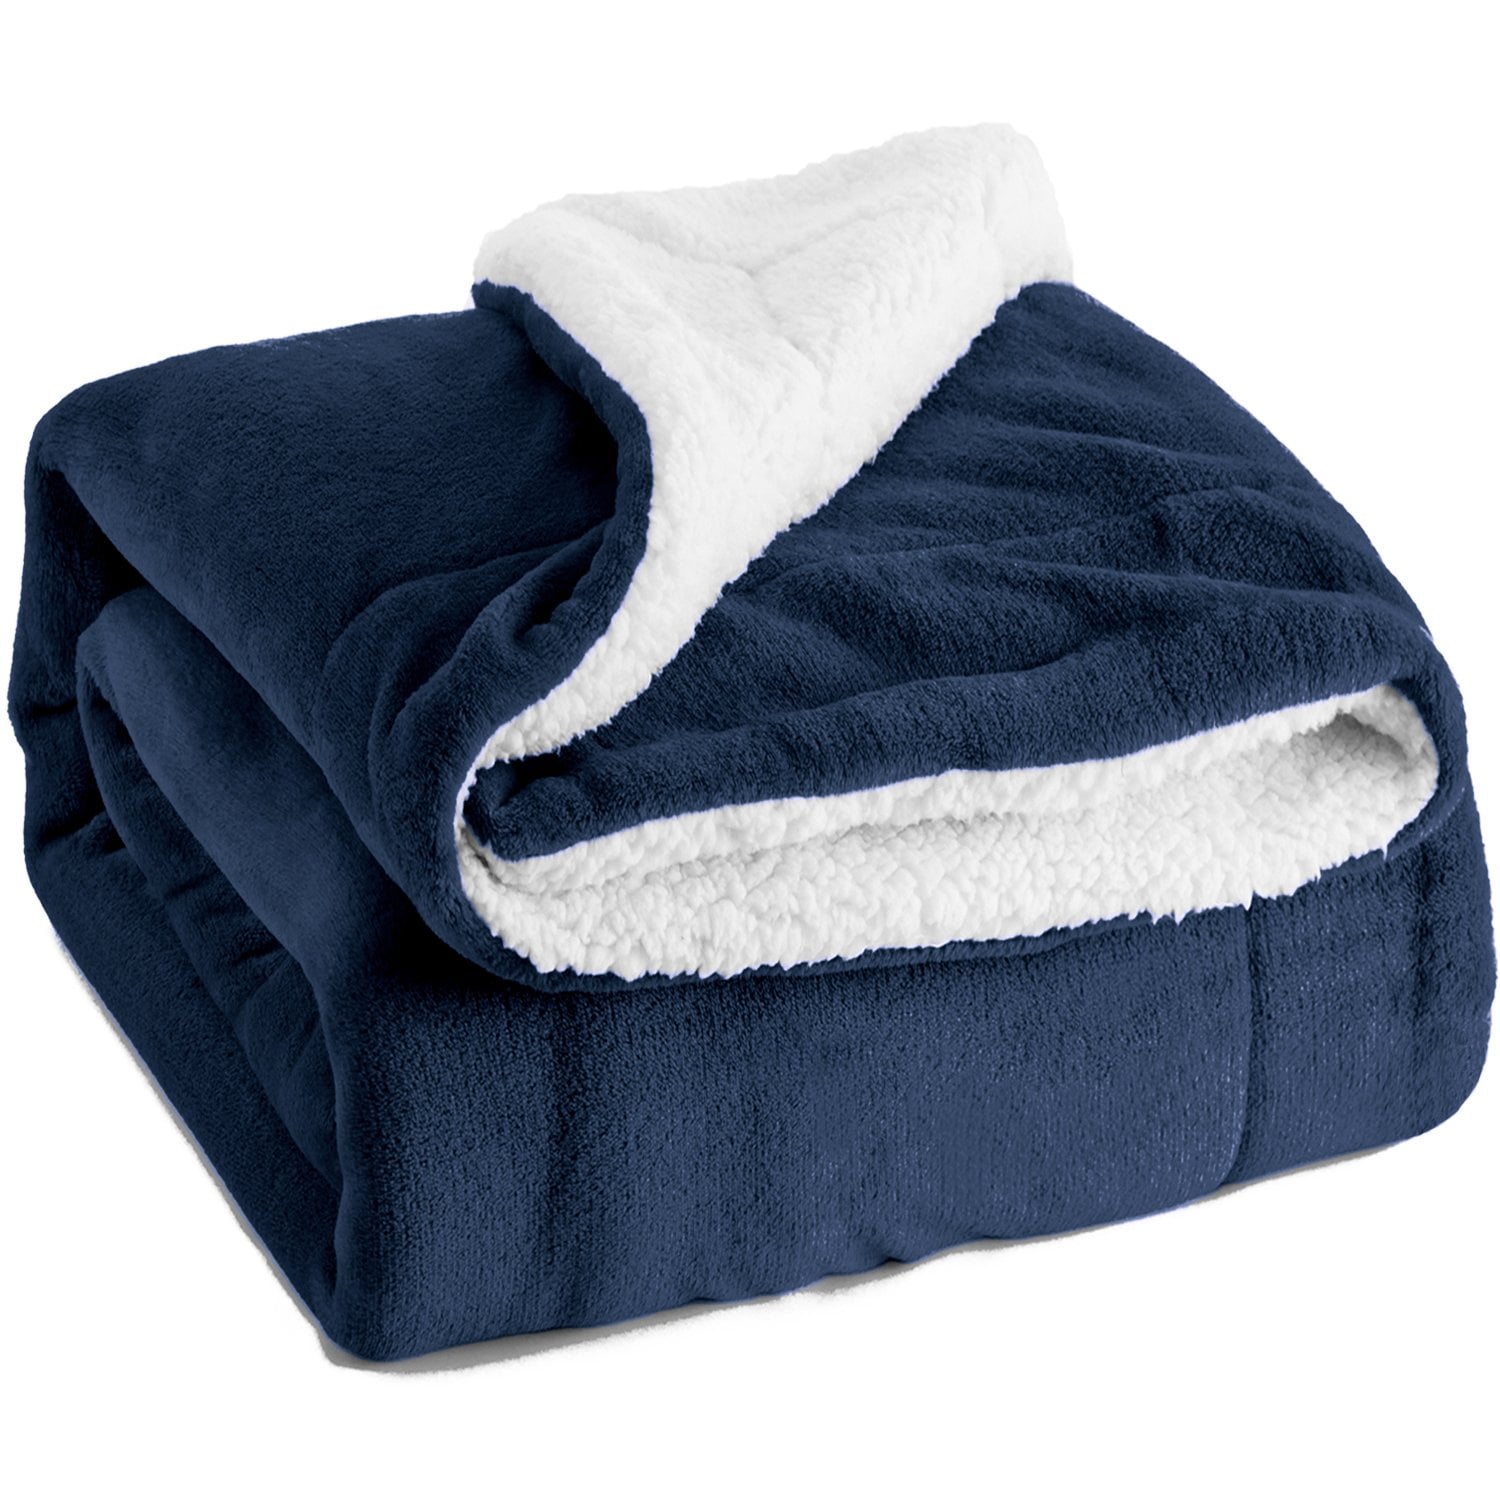 BestBuyBox Soft Fleece Throw Blanket Twin Size Fuzzy Plush 366GSM Lightweight Microfiber Bed Blanket for Couch